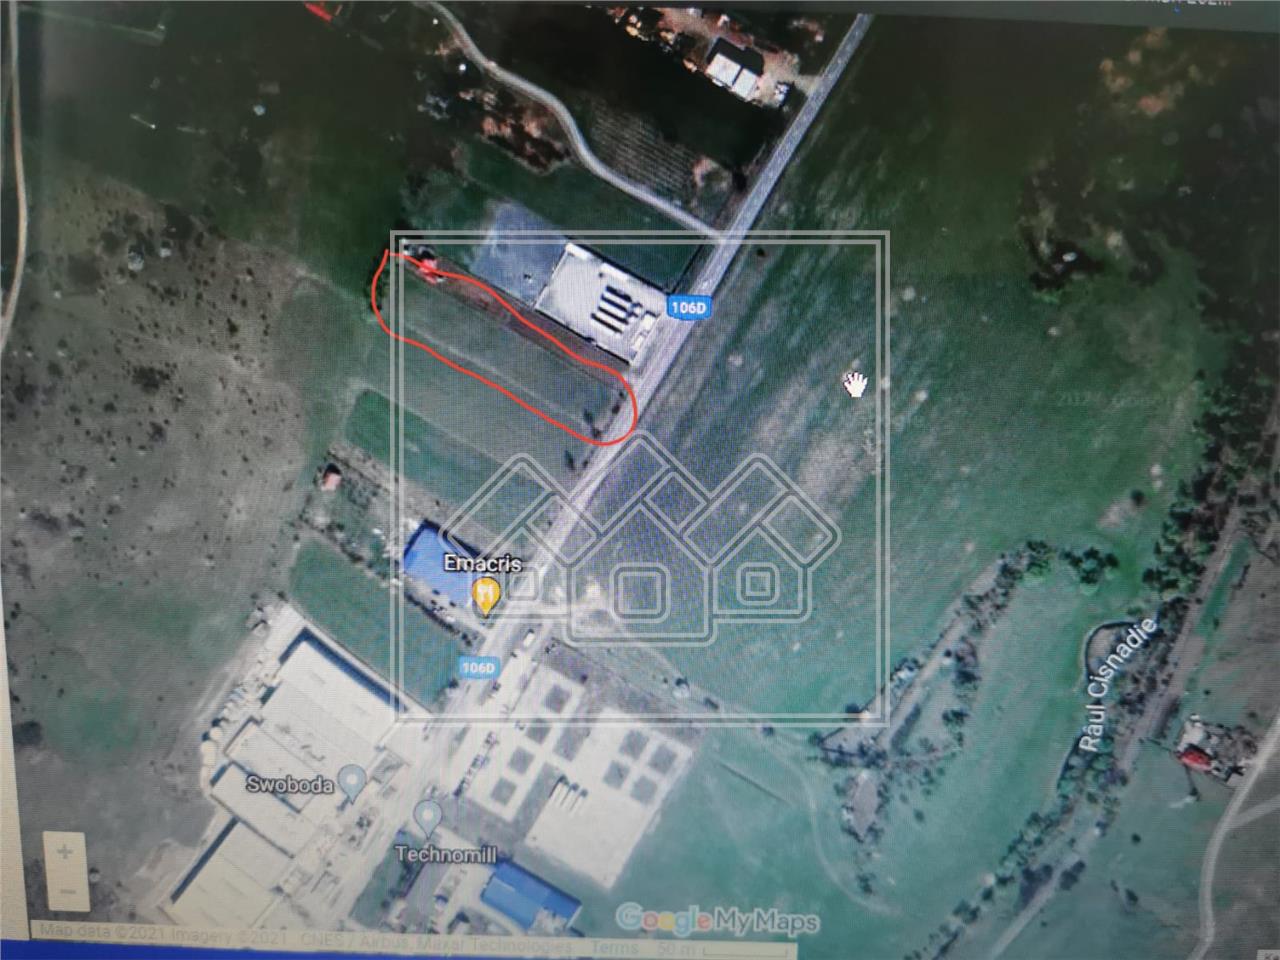 Land for rent in Sibiu - Cisnadie 3100 sqm